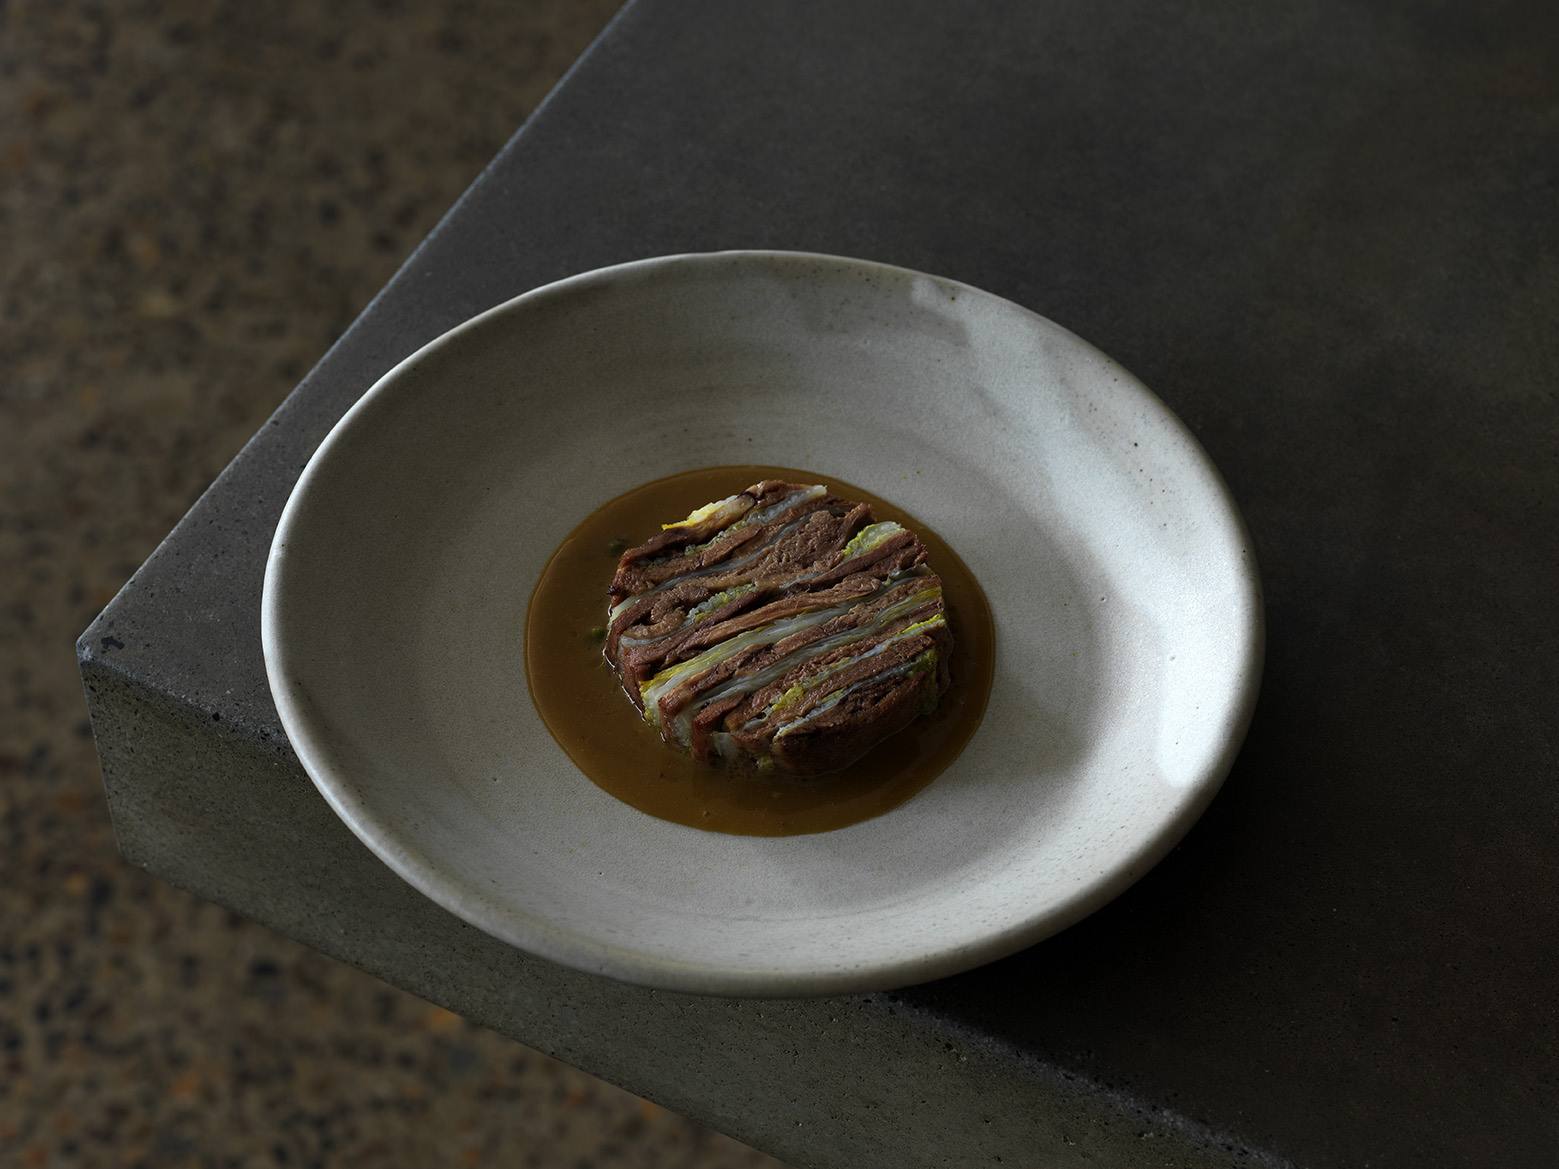 Lewis says when you get out and see how things grow, you’re not just thinking of one part and sometimes that’s how a dish is born - like his tongue terrine using Hayter’s Hill beef tongues and wombok from Boon Luck Farm.